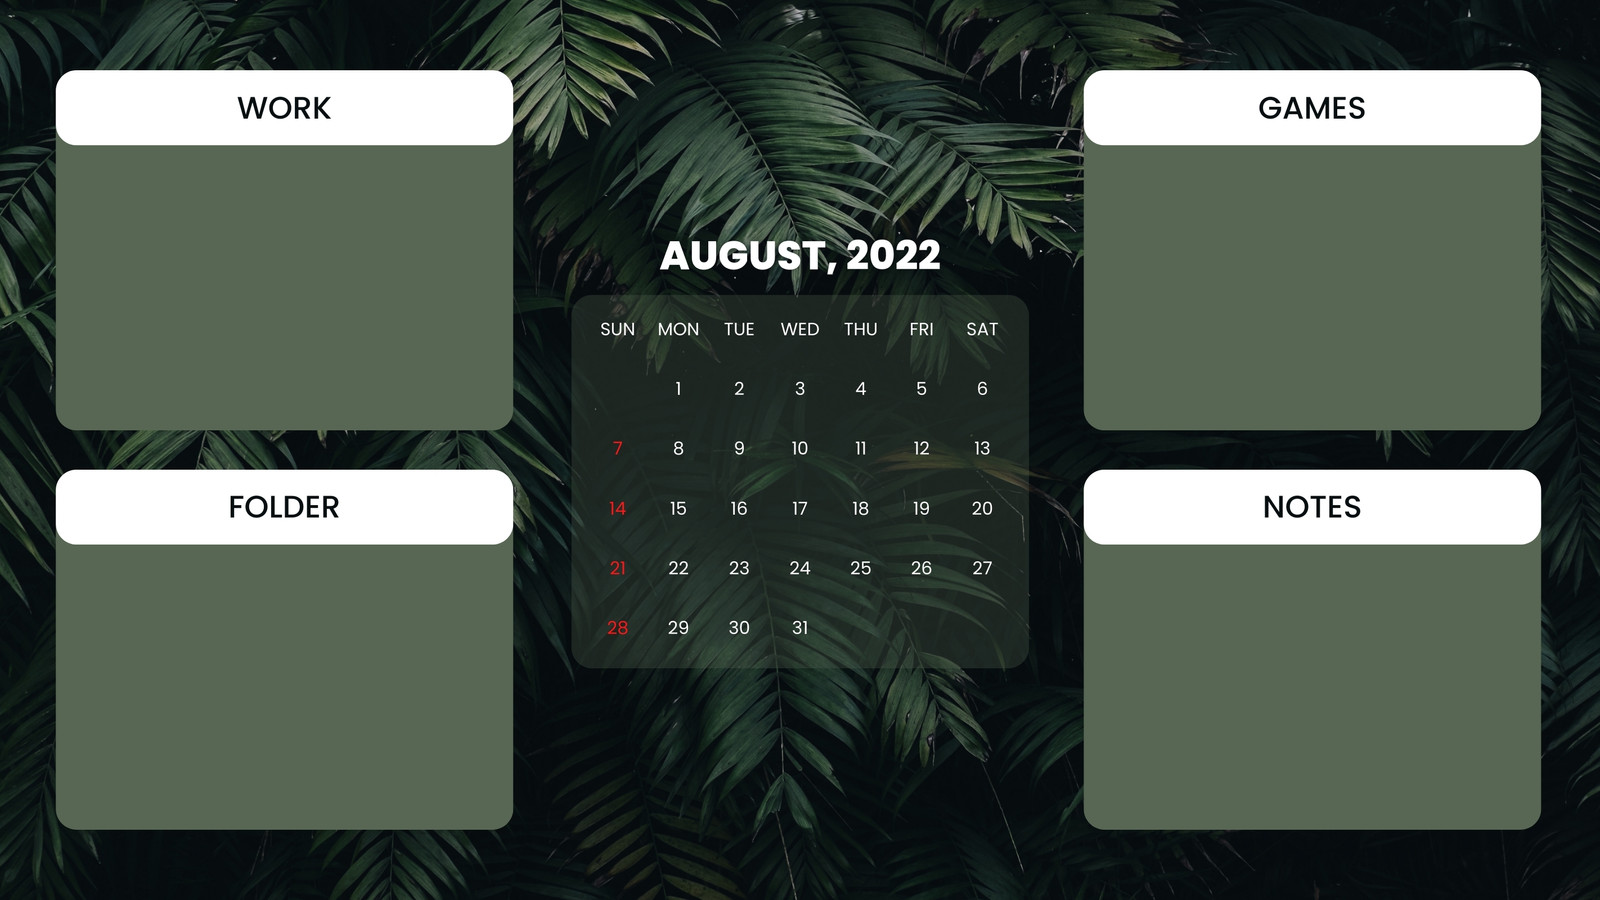 Page 15 - Free and fully customizable desktop wallpaper templates | Canva